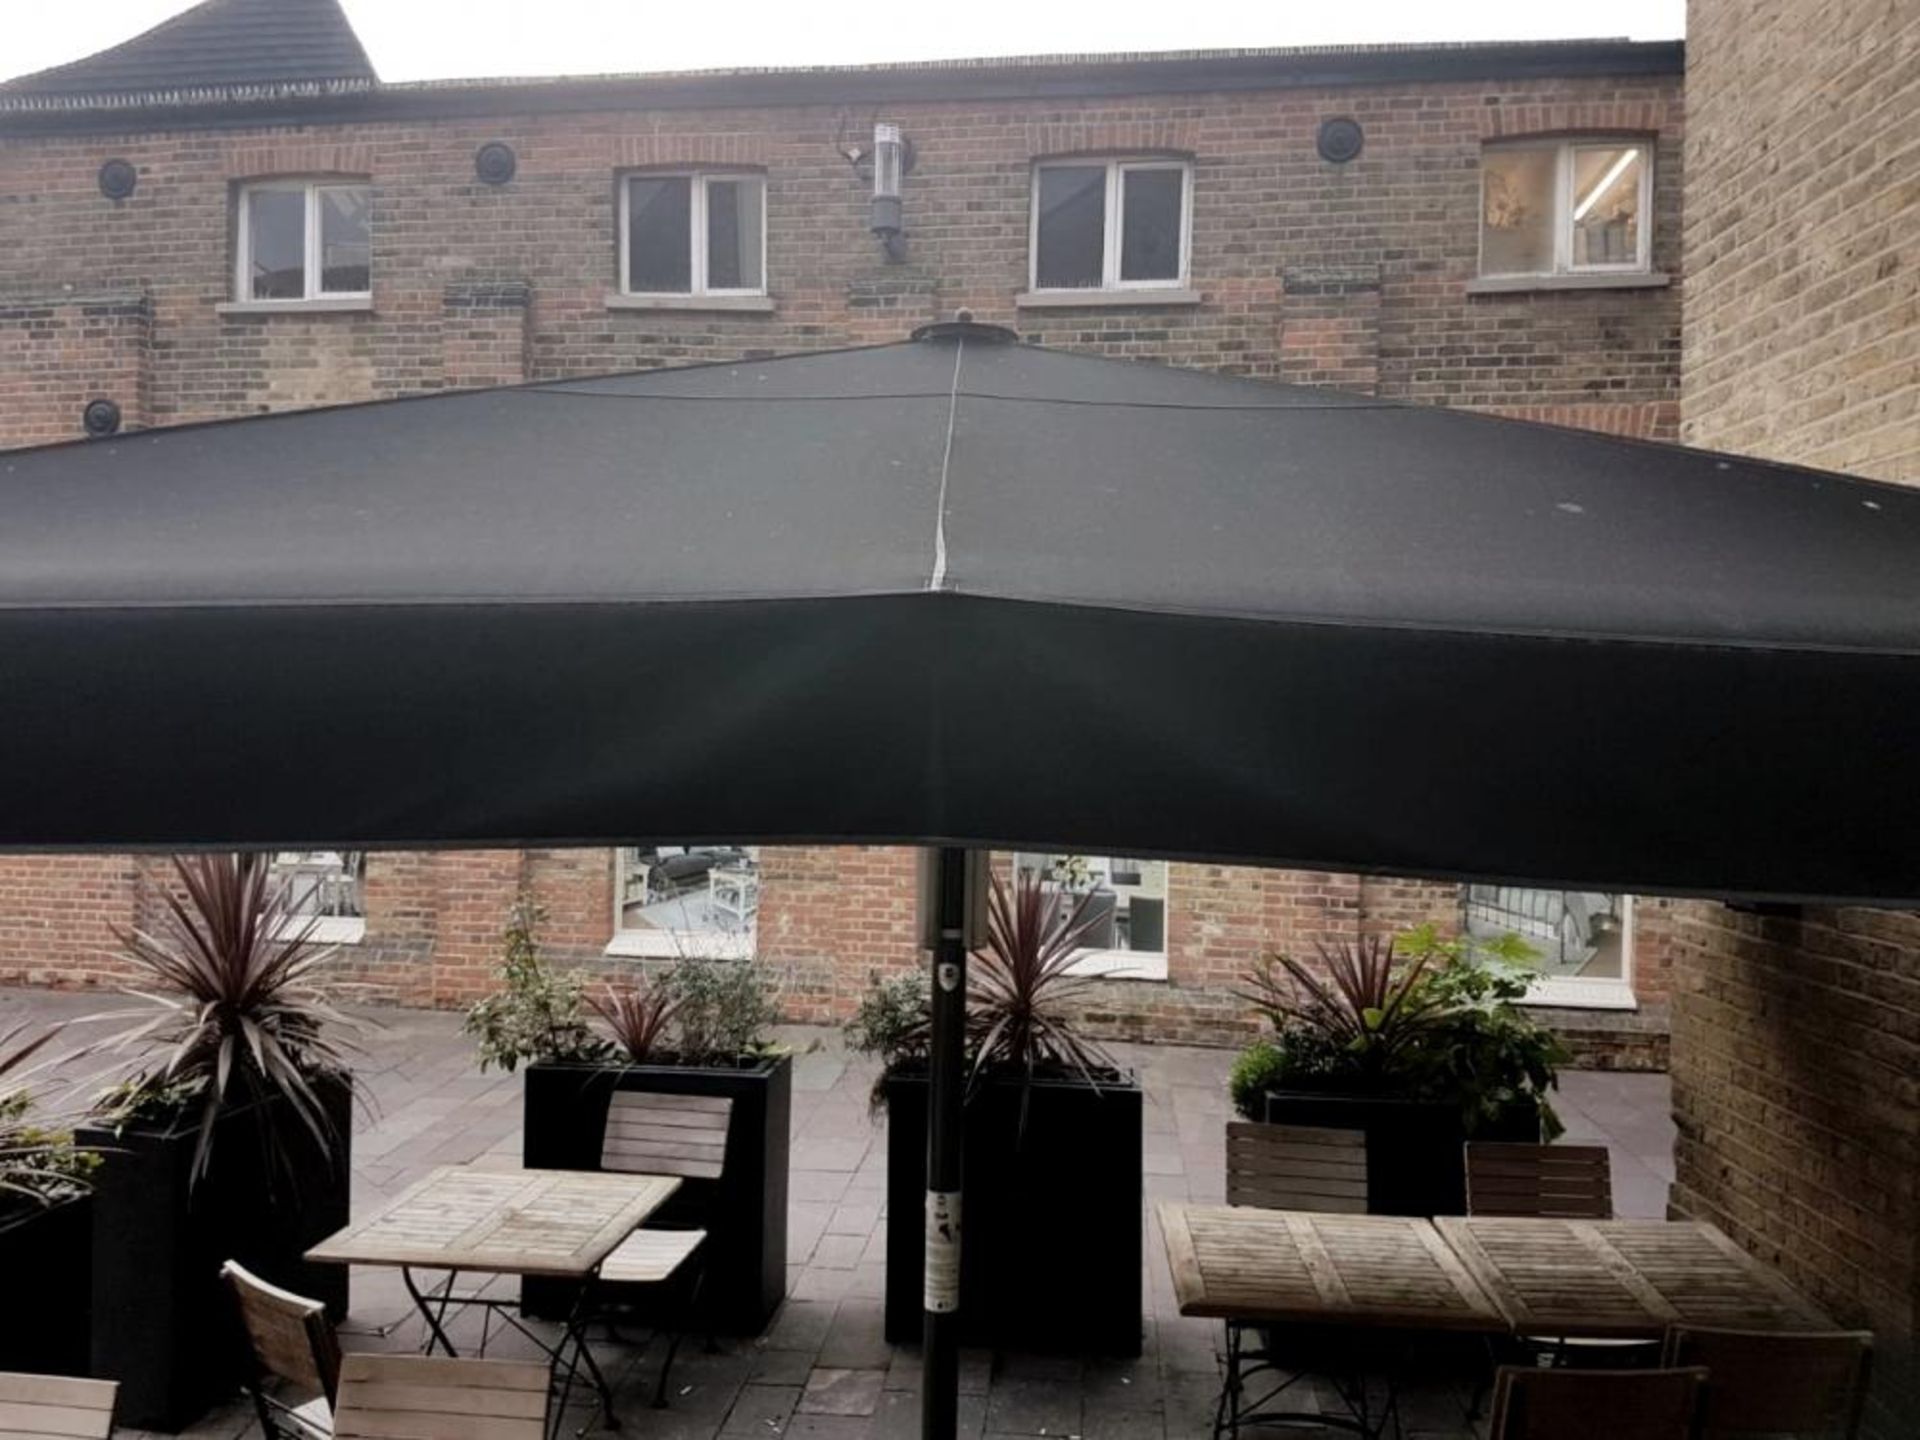 1 x Large Commercial Garden Patio Parasol With 4 x IR Heaters - Recently Removed From A City Centre - Image 5 of 5